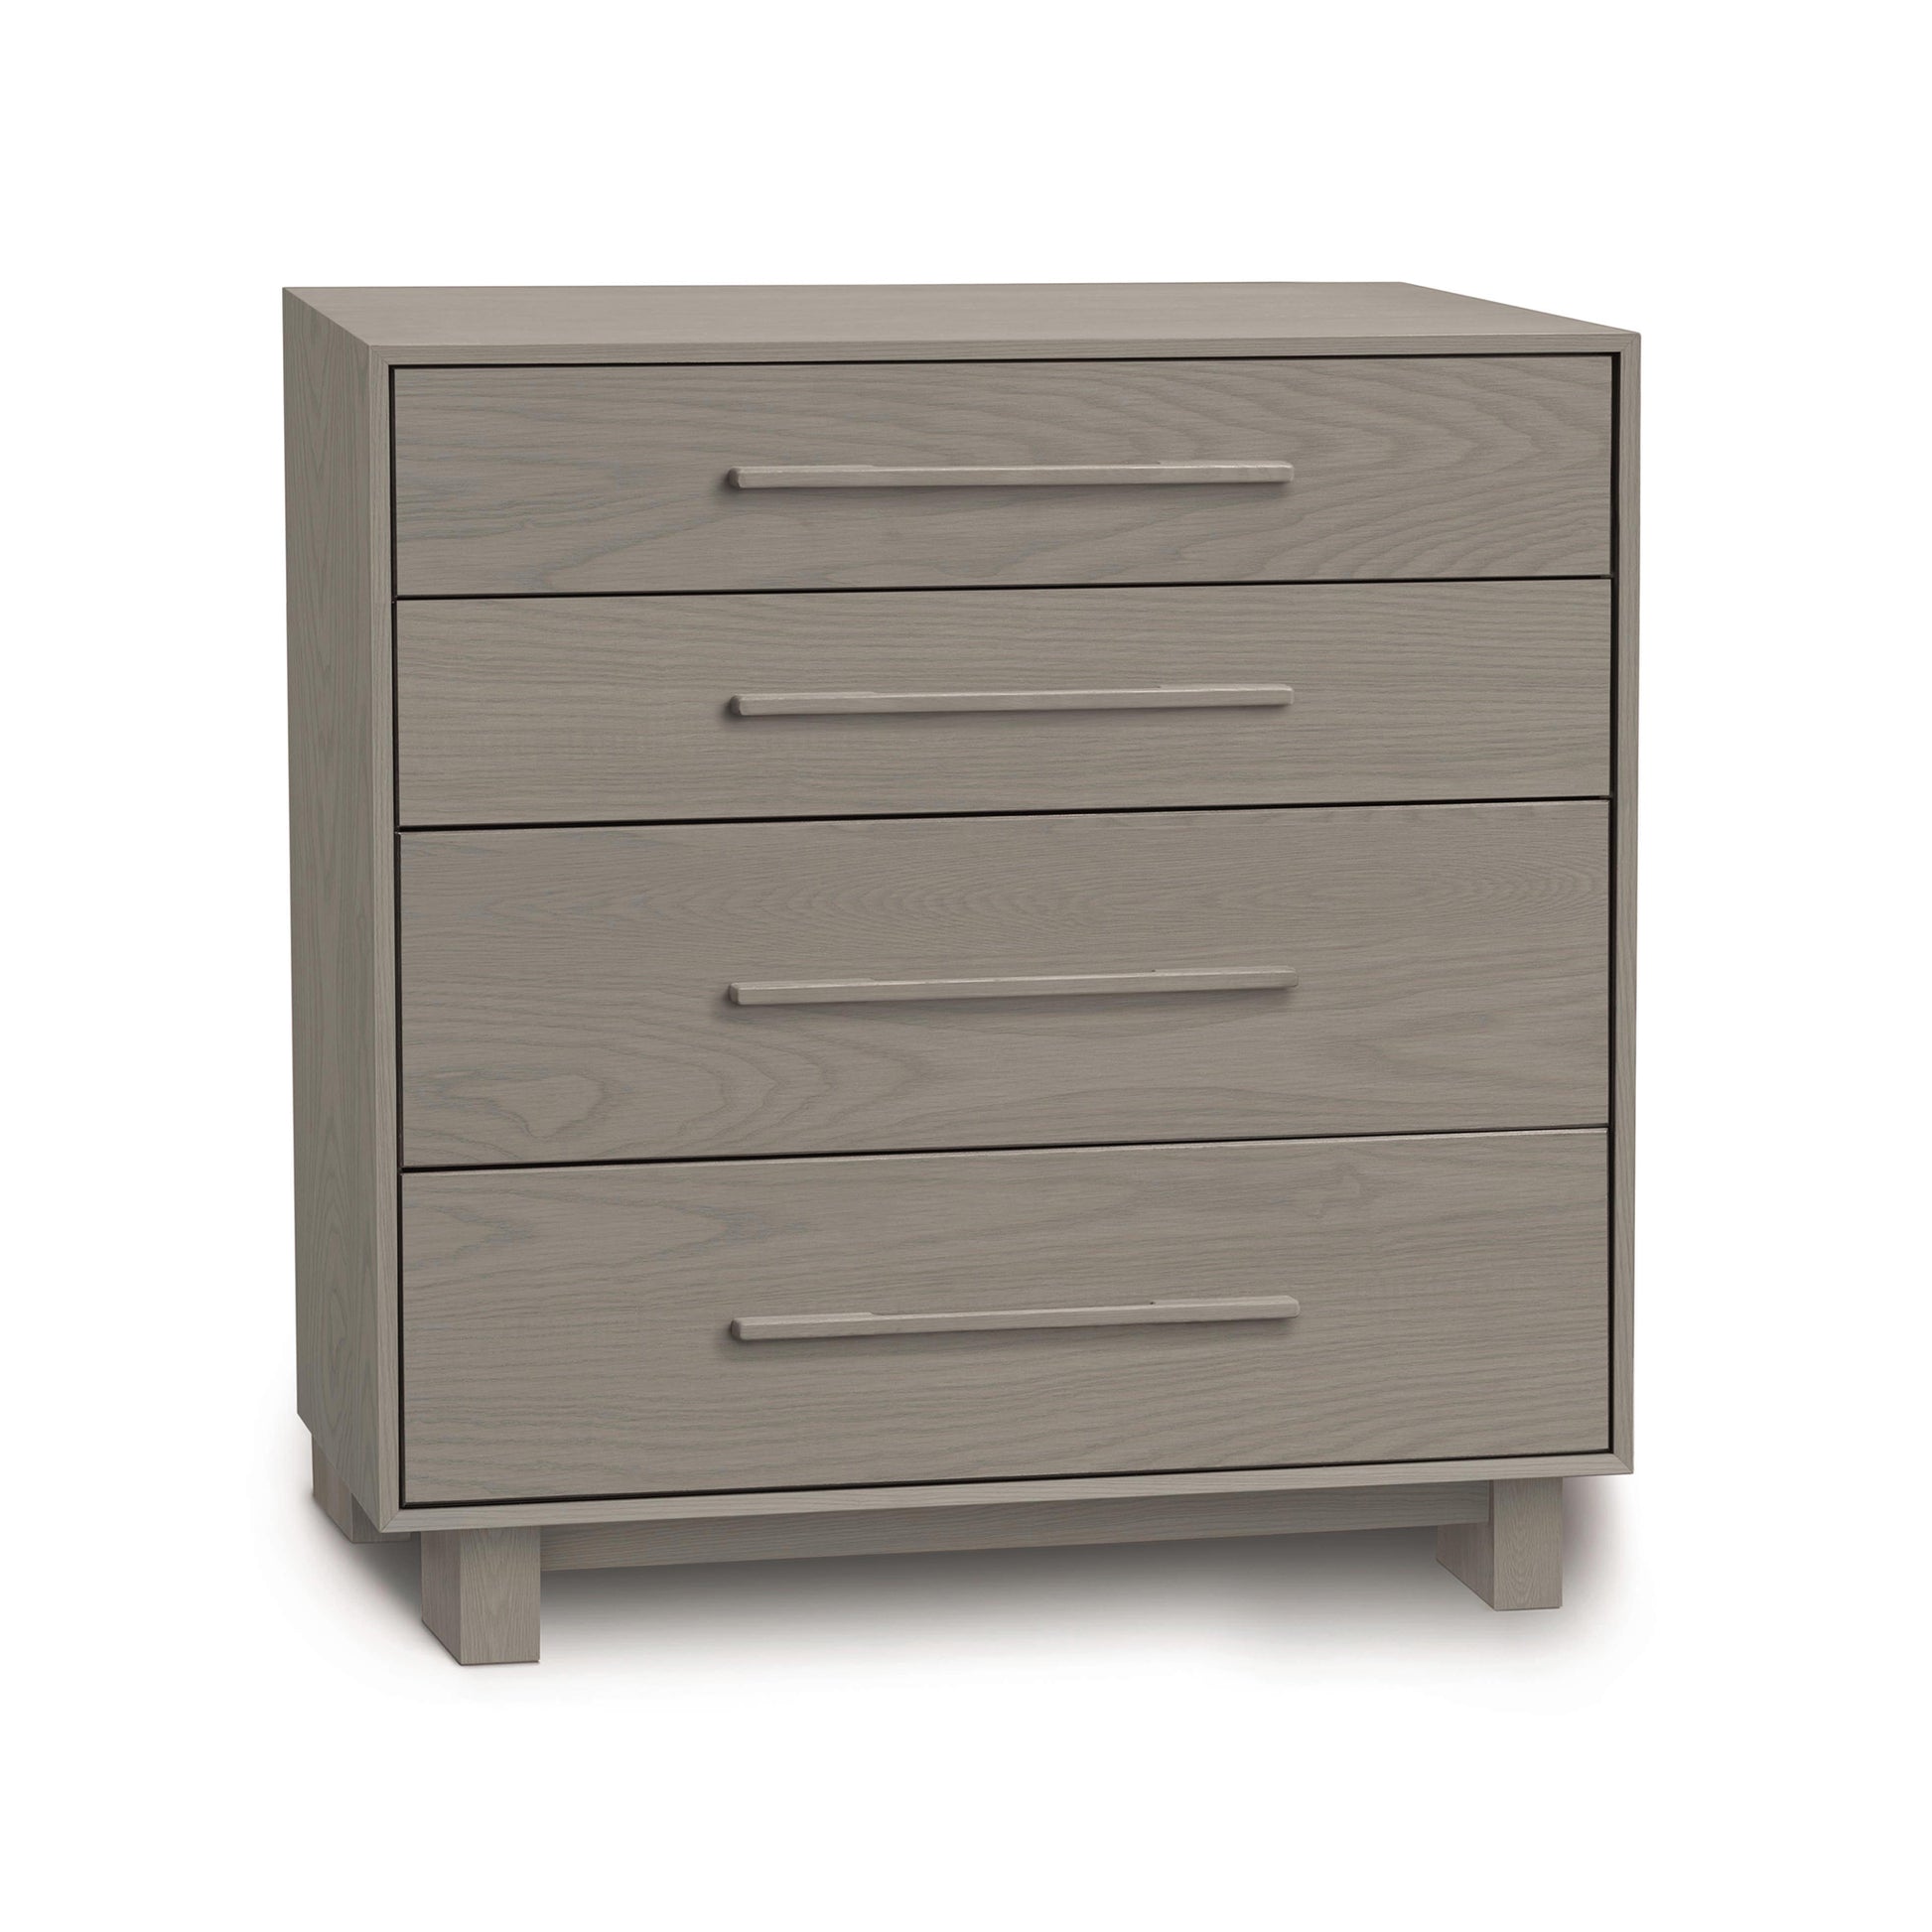 The Sloane 4-Drawer Chest by Copeland Furniture is a contemporary bedroom essential. This Sloane 4-Drawer Chest features spacious drawers and showcases its elegant design on a clean white background.